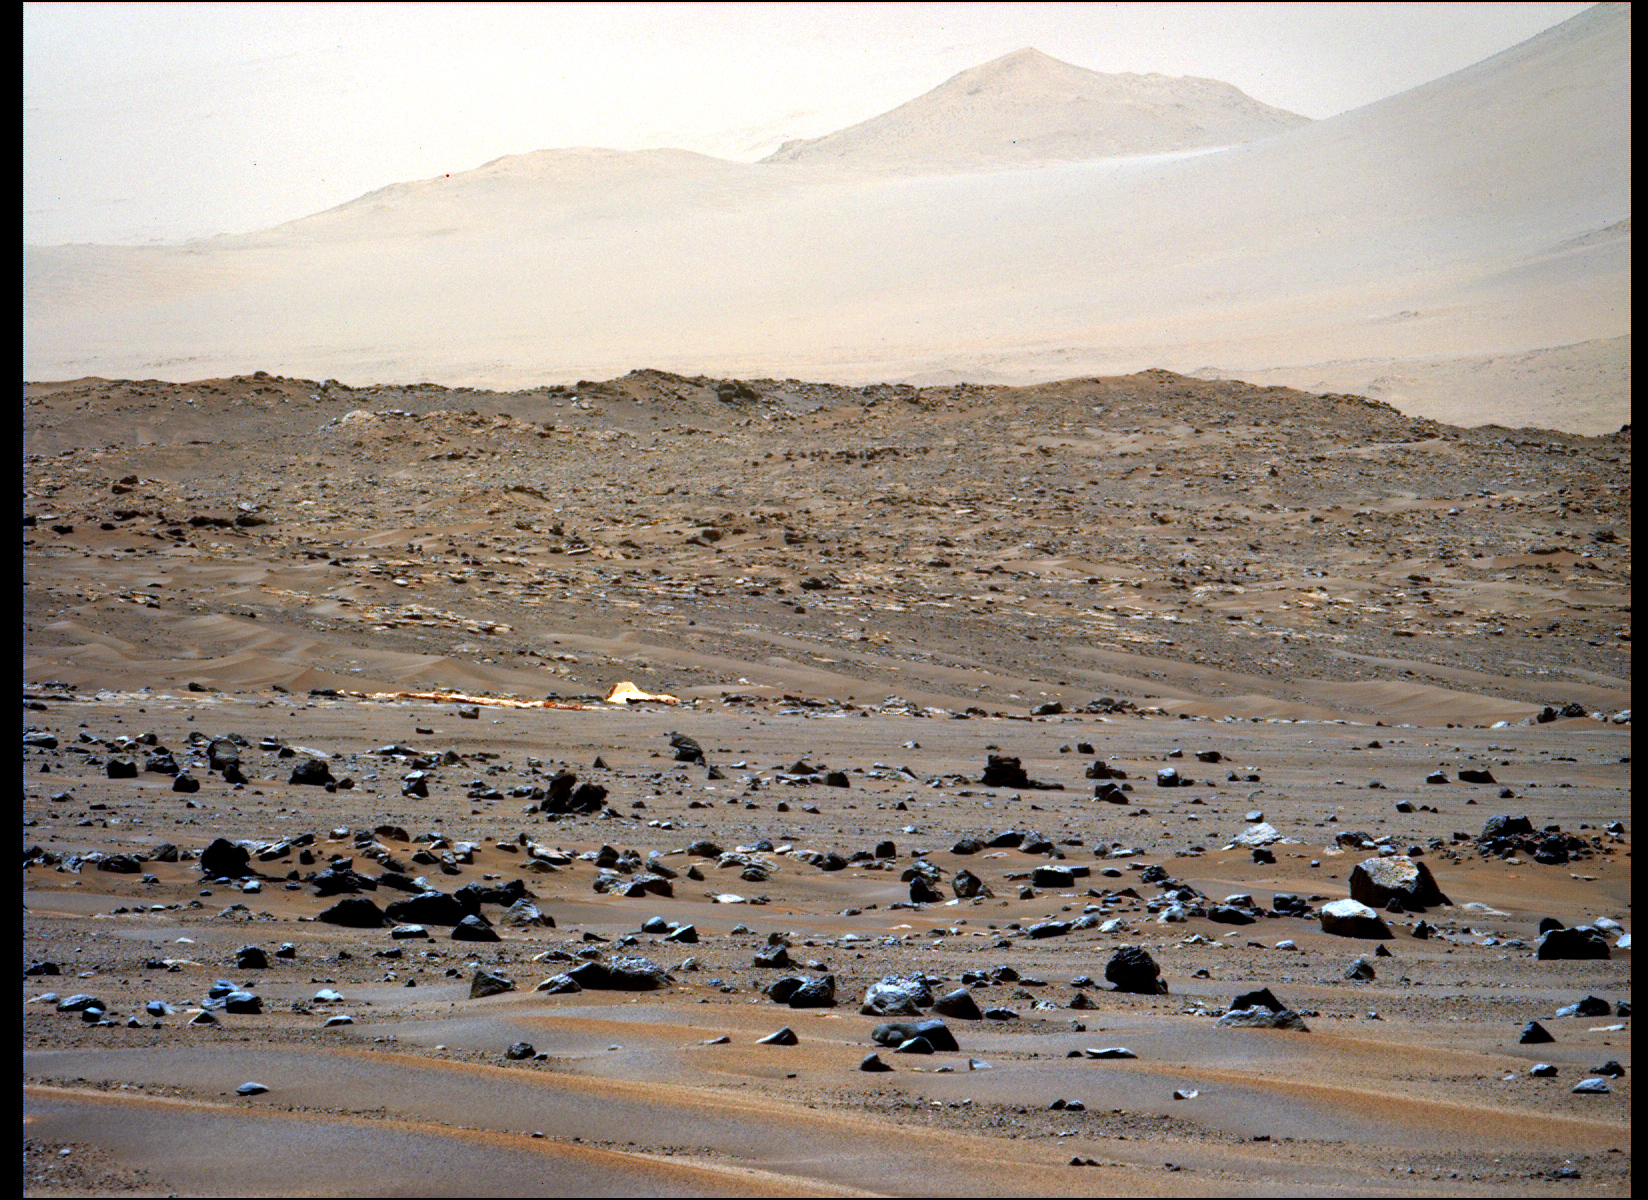 The parachute that helped Perseverance reach Mars lays on the Martian rocks.